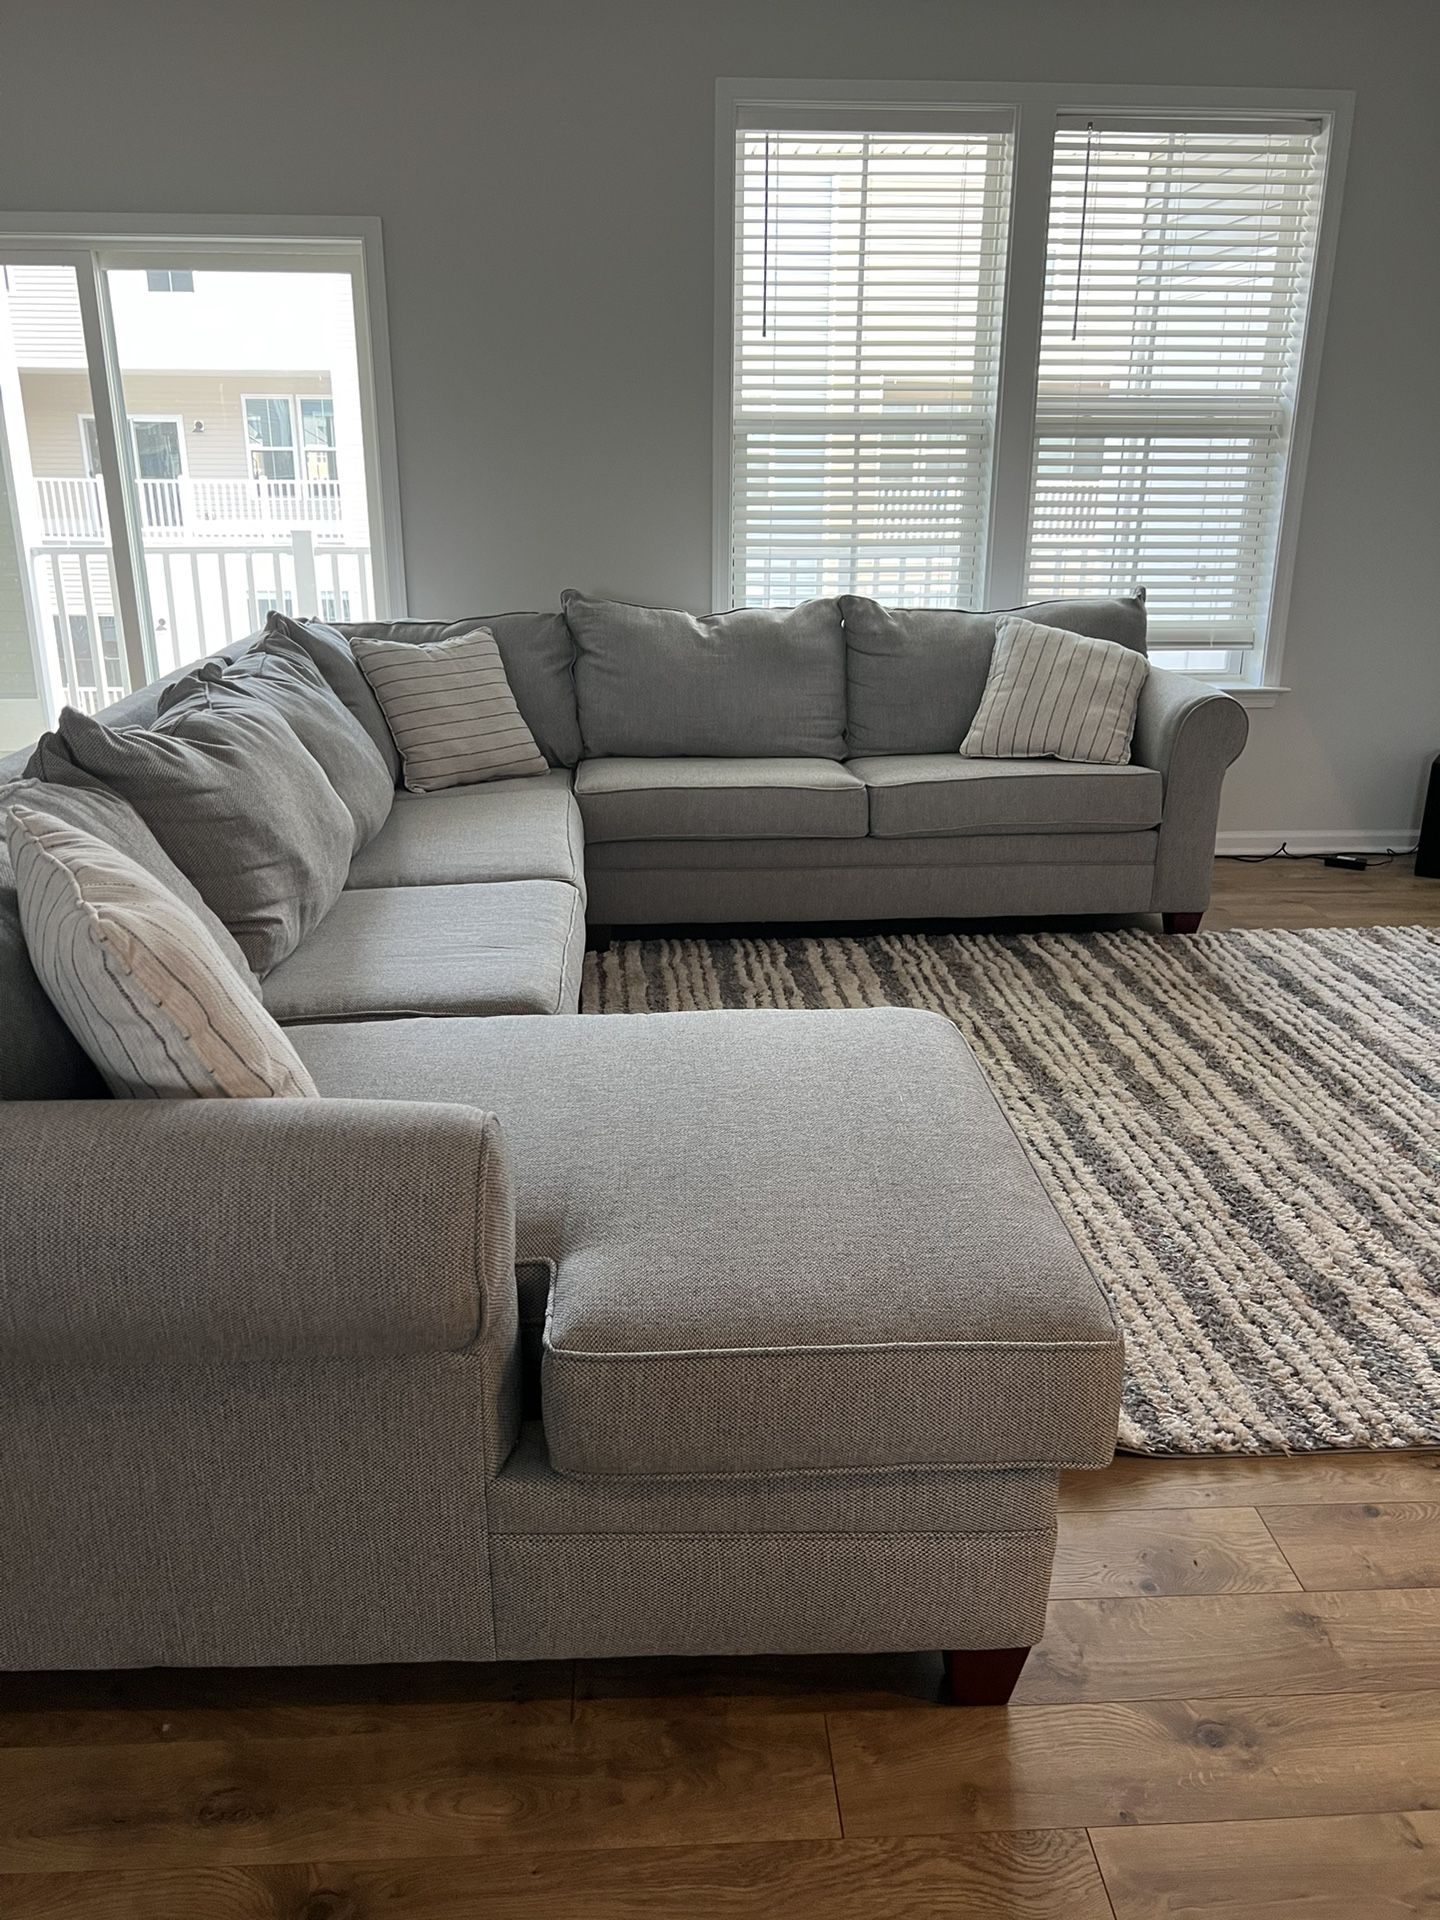 Newly Purchased Grey Sectional Sofa and Area Rug